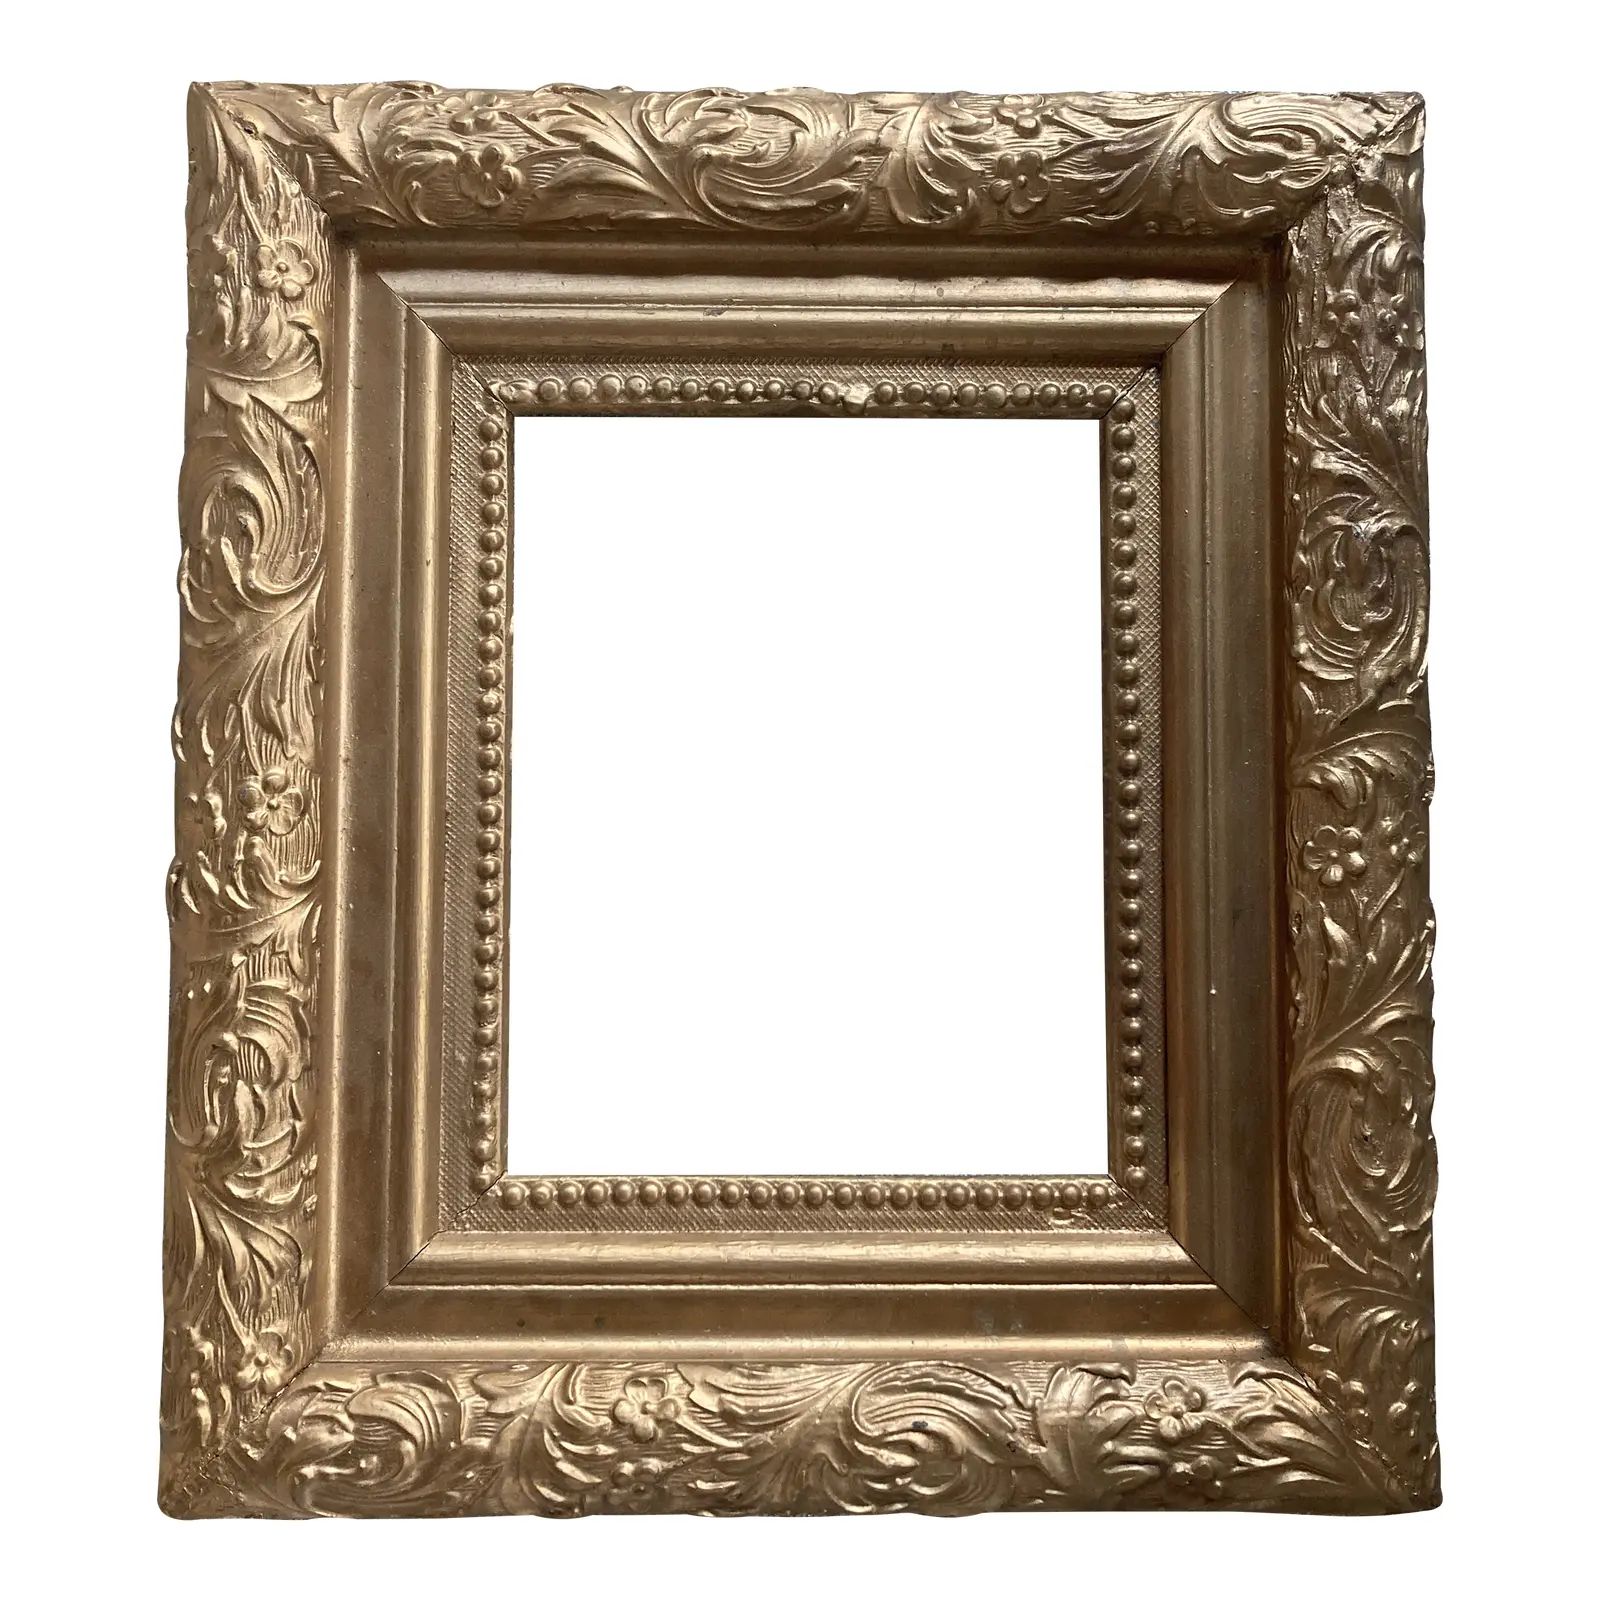 Ornate Antique Frame Painted Gold | Chairish